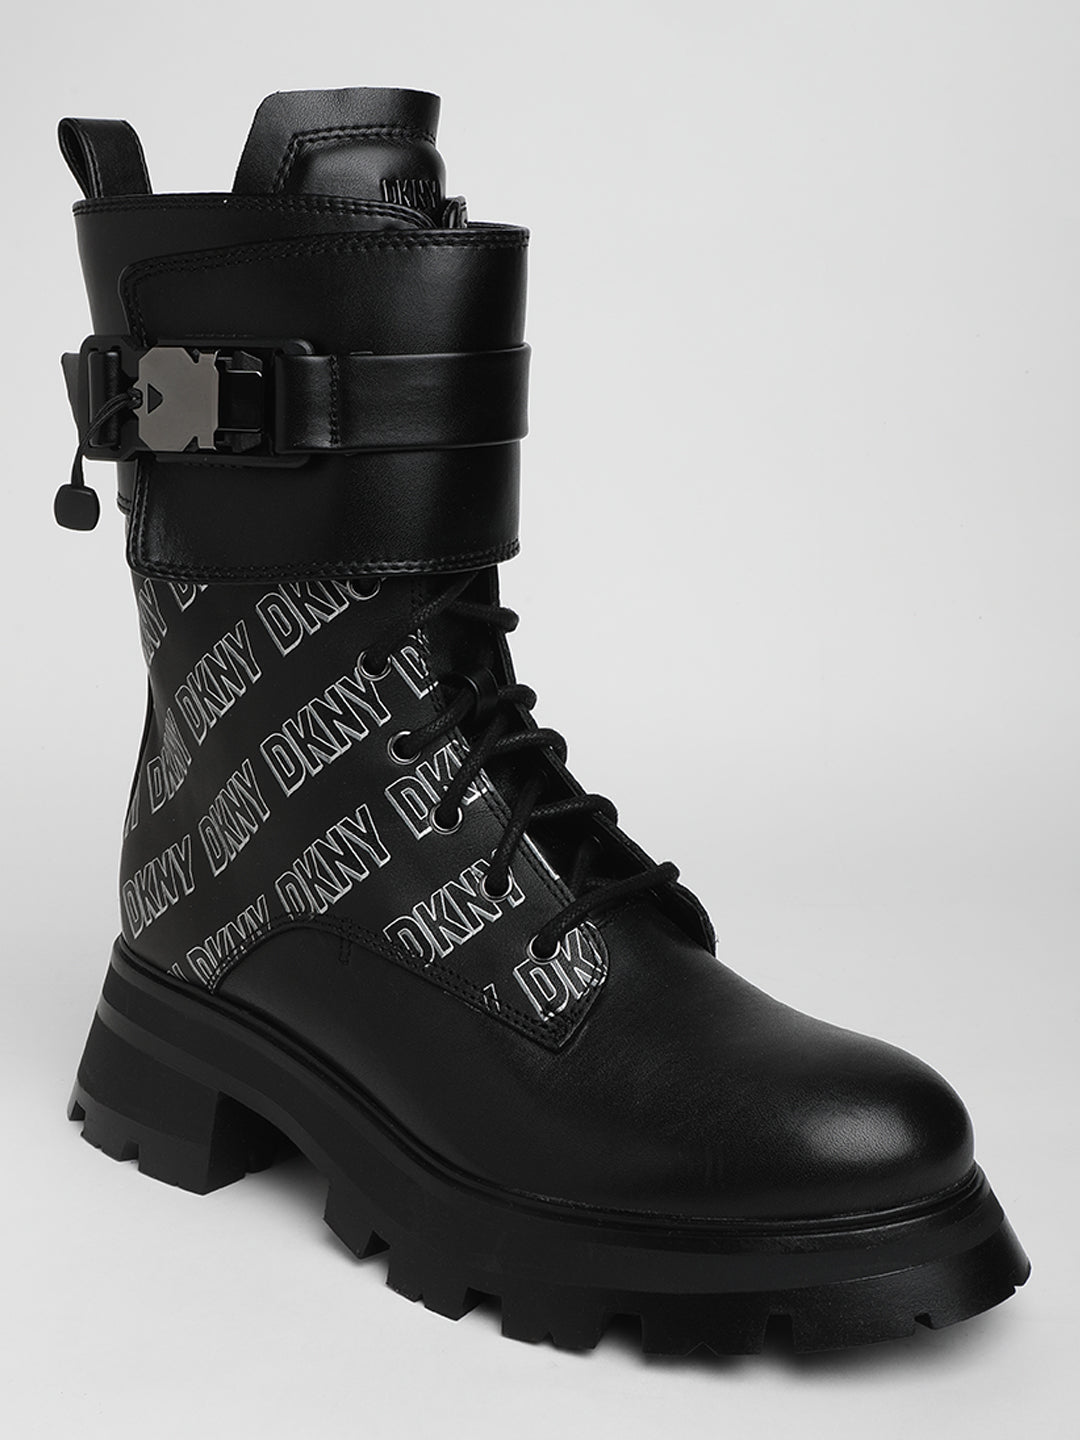 Dkny Boots Womens Outlet | innoem.eng.psu.ac.th